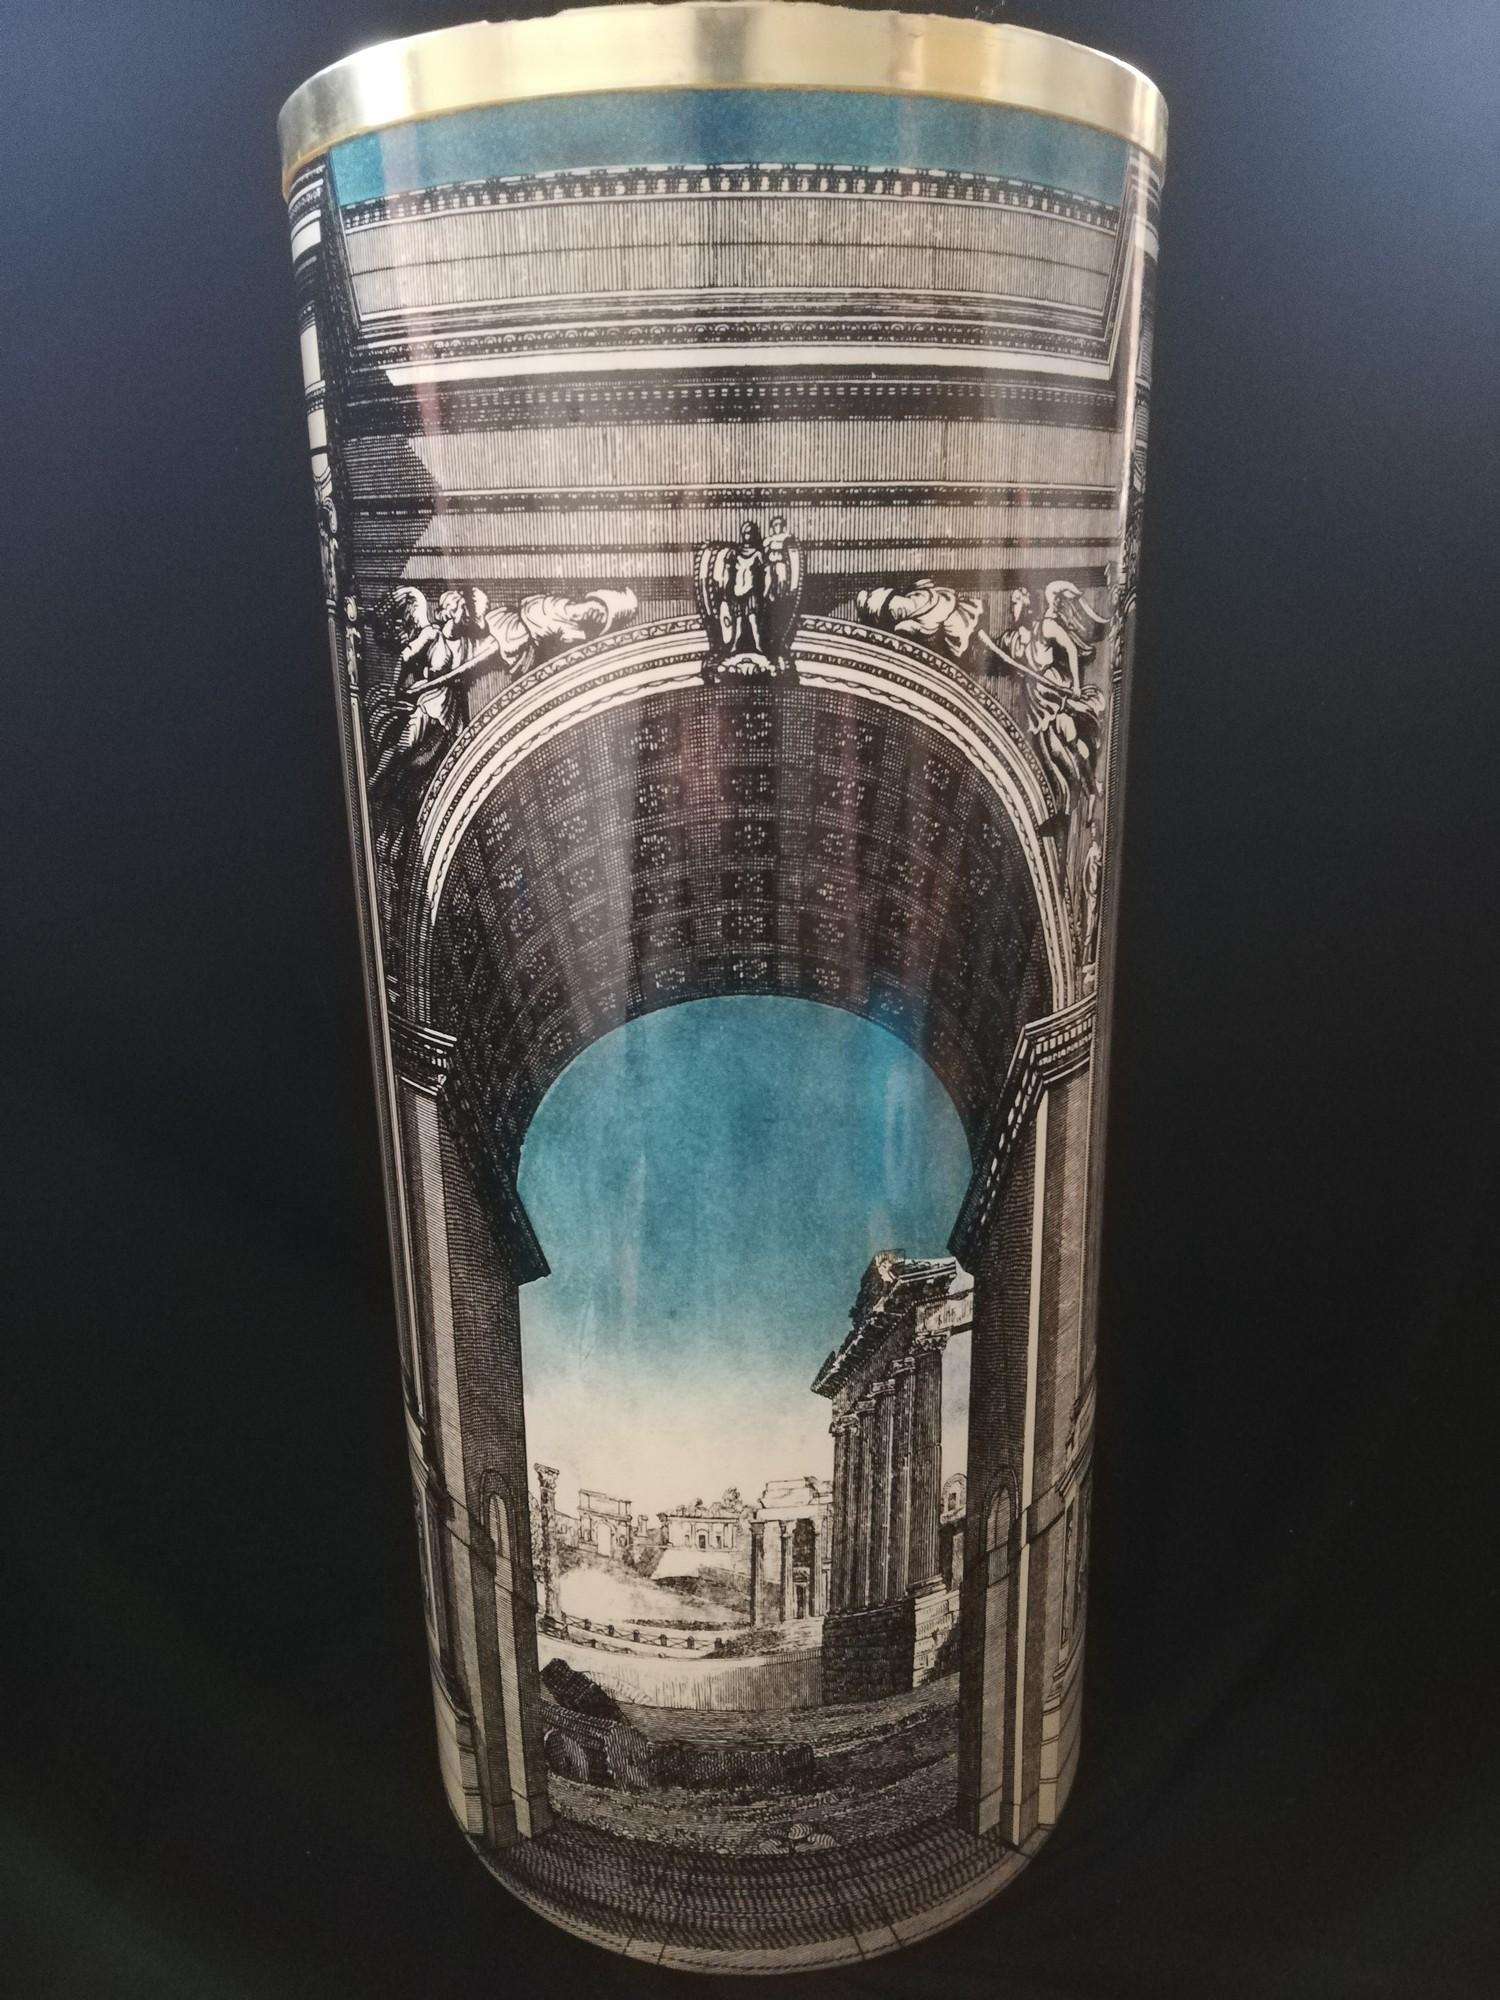 Fornasetti (unmarked) 'Arco Romano' umbrella stand of classical architecture design -height 22½" - Image 2 of 6